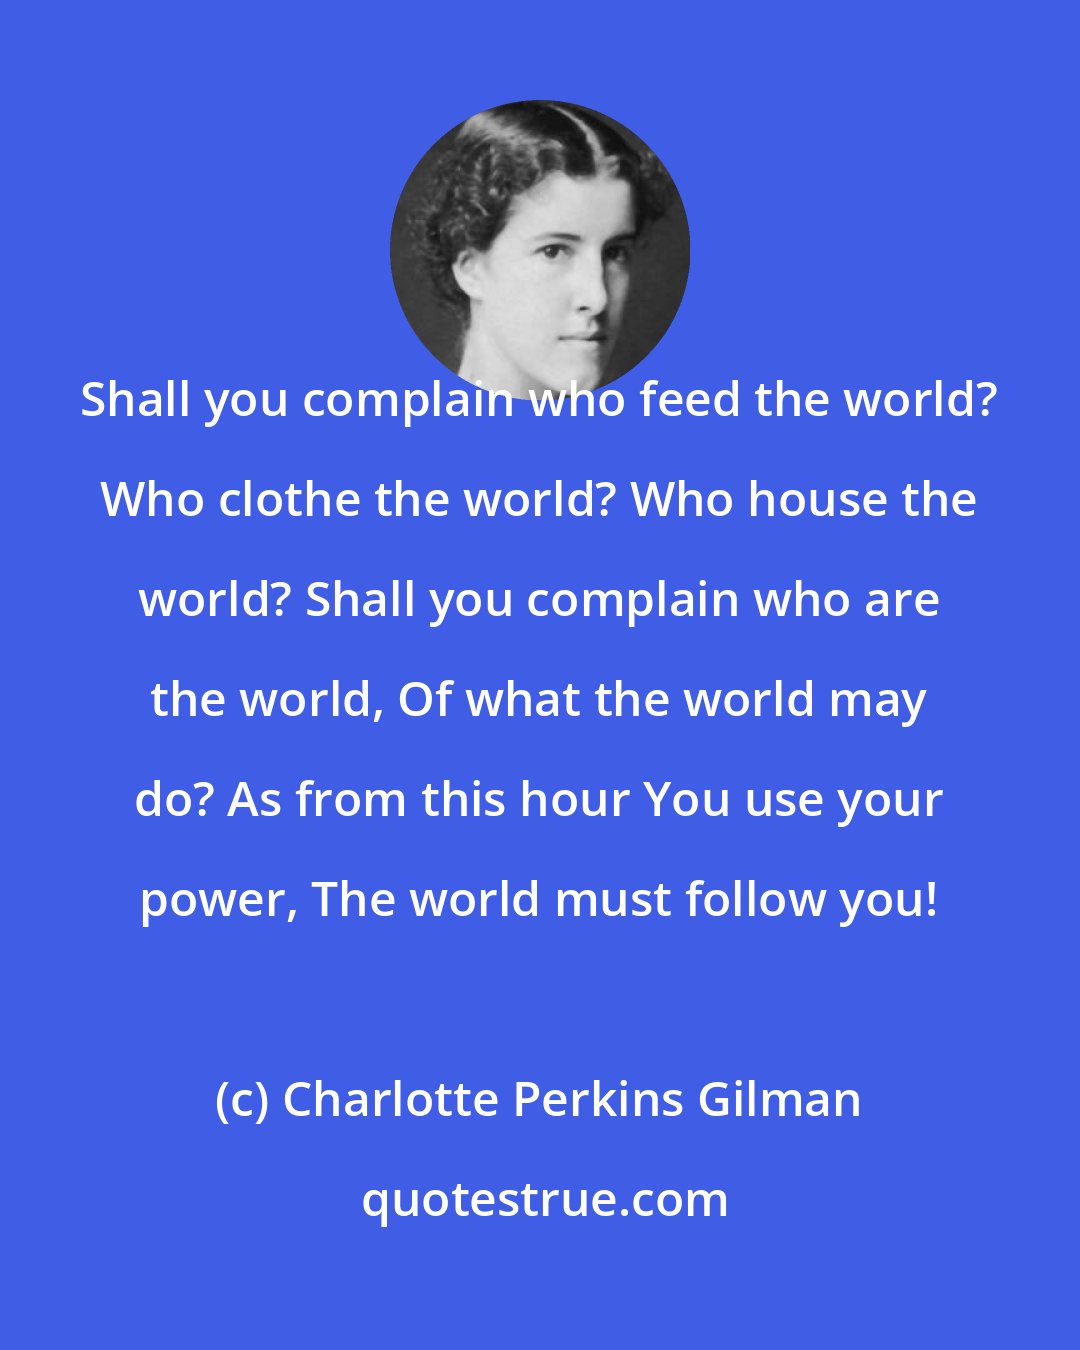 Charlotte Perkins Gilman: Shall you complain who feed the world? Who clothe the world? Who house the world? Shall you complain who are the world, Of what the world may do? As from this hour You use your power, The world must follow you!